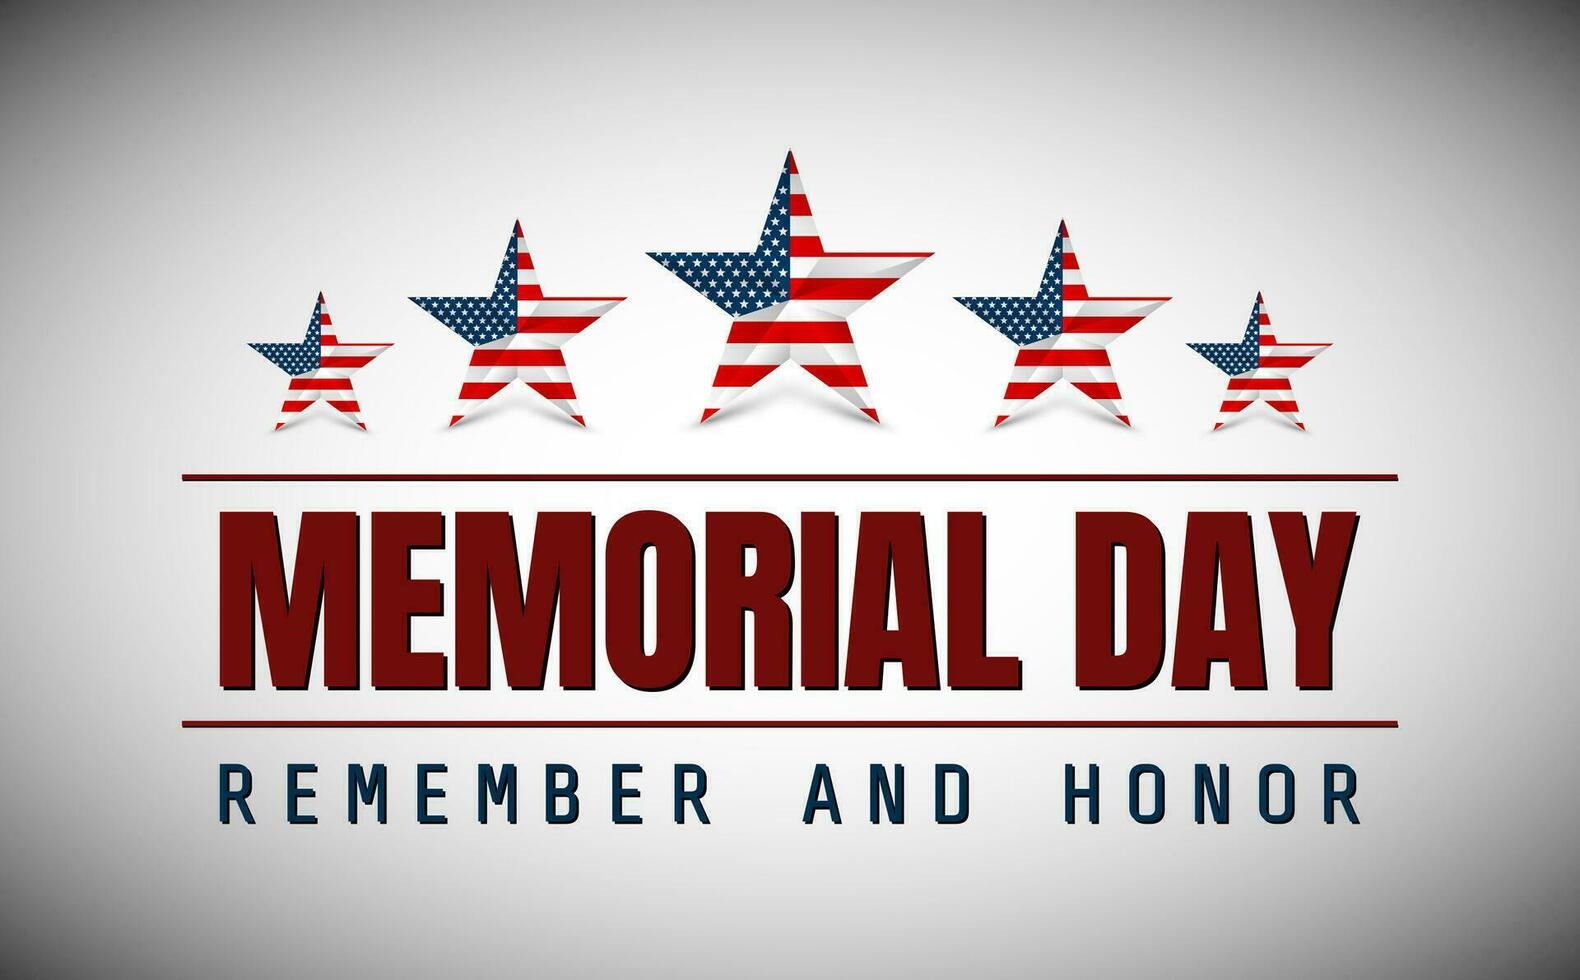 Memorial Day with star in national flag colors vector